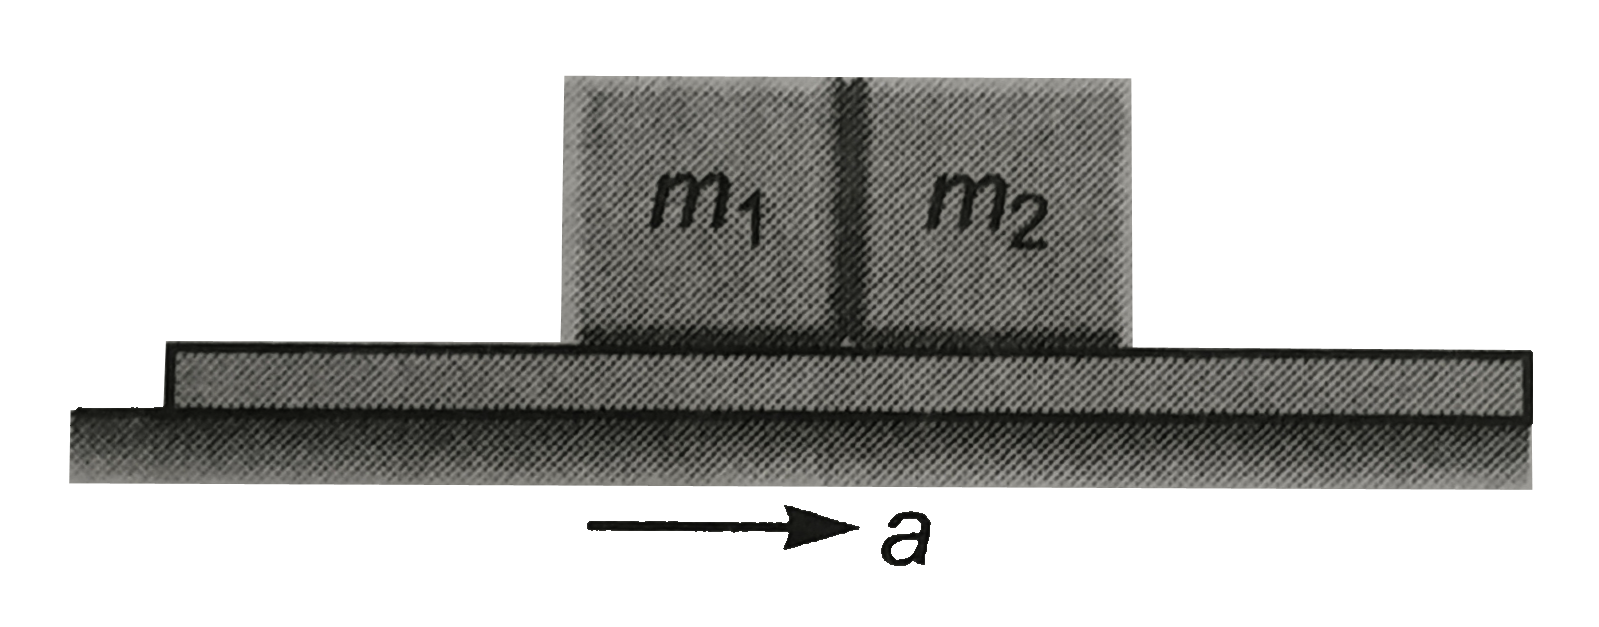 Two blocks of masses m(1) and m(2) are placed in contact with each other on a horizontal platform as shown in figure The coefficient of friction between m(1) and platform is 2mu and that between block m(2) and platform is mu.The platform moves with an acceleration a . The normal reaction between the blocks is